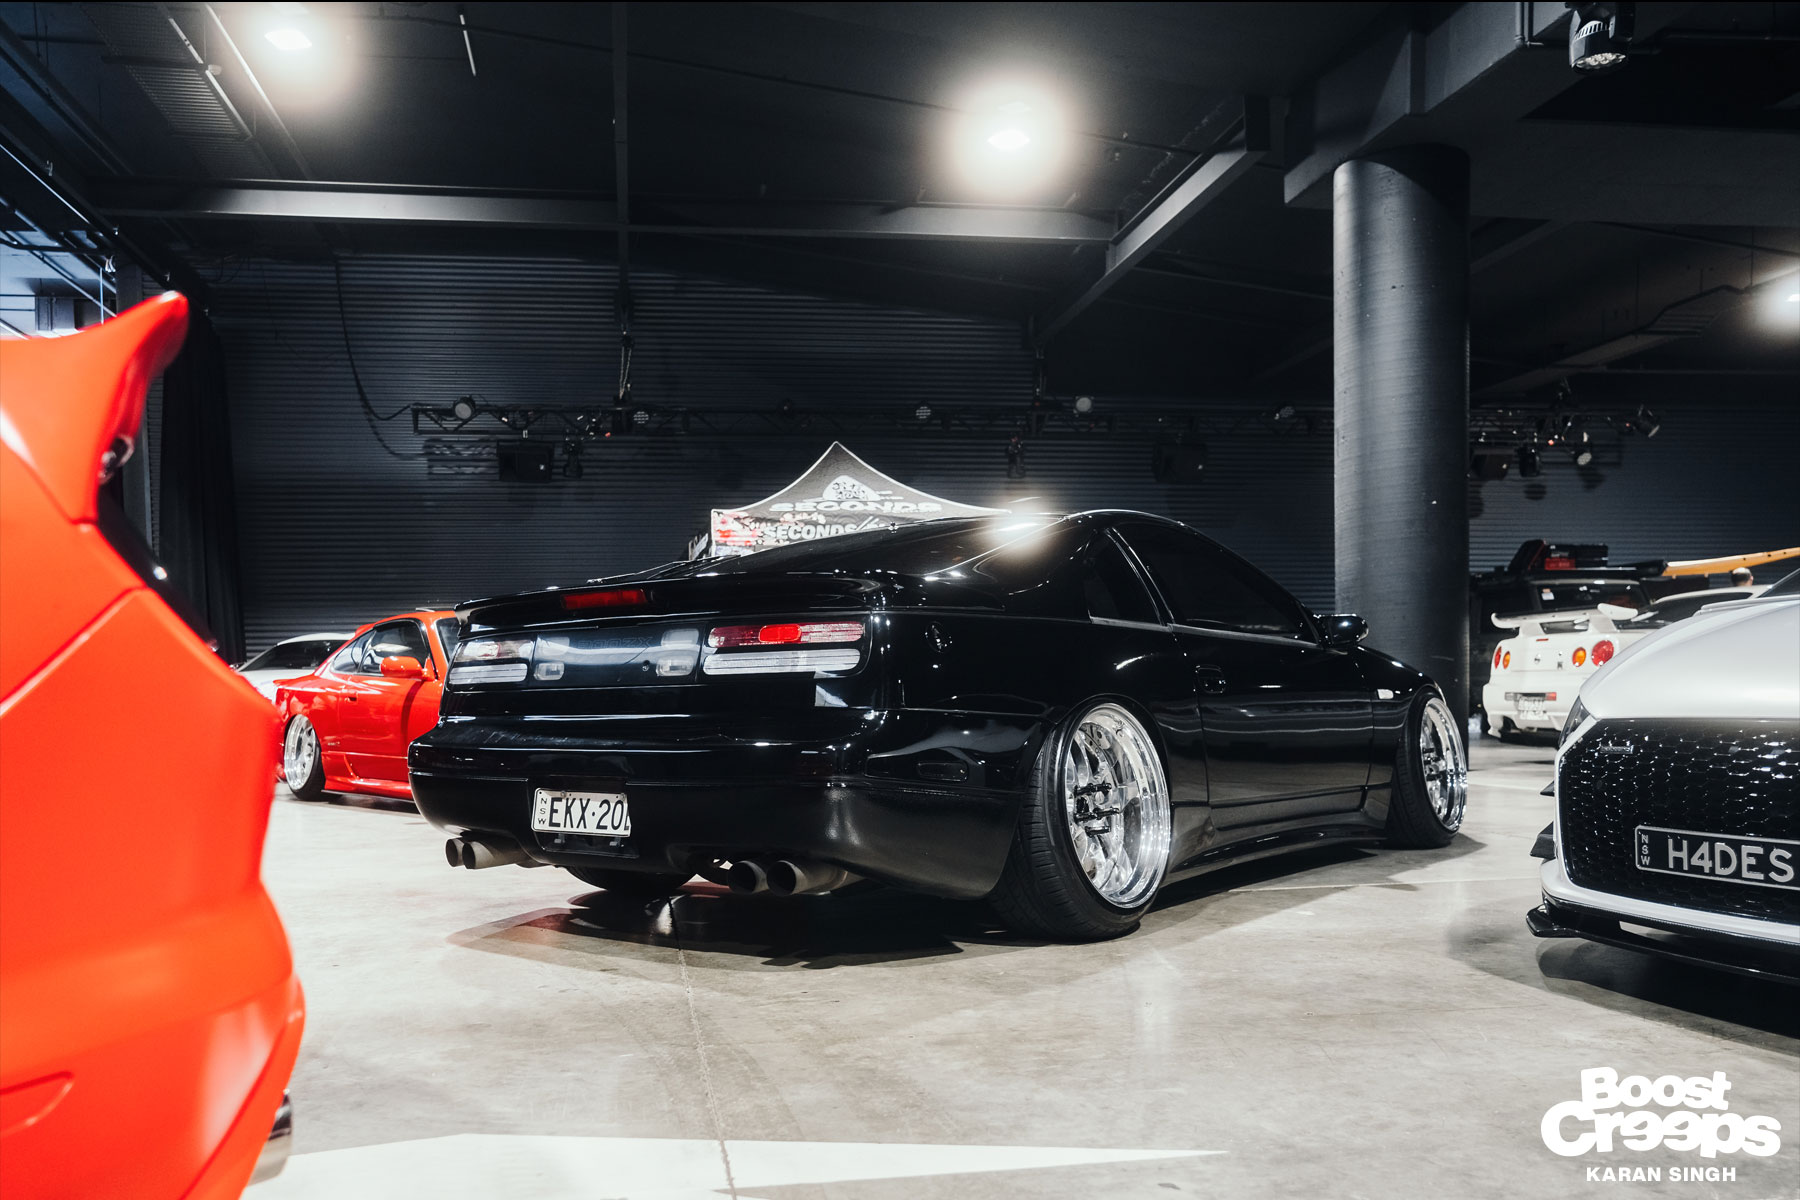 Bagged 300zx at recent UNMARKED 22 by Snow Foam ft illiminate event